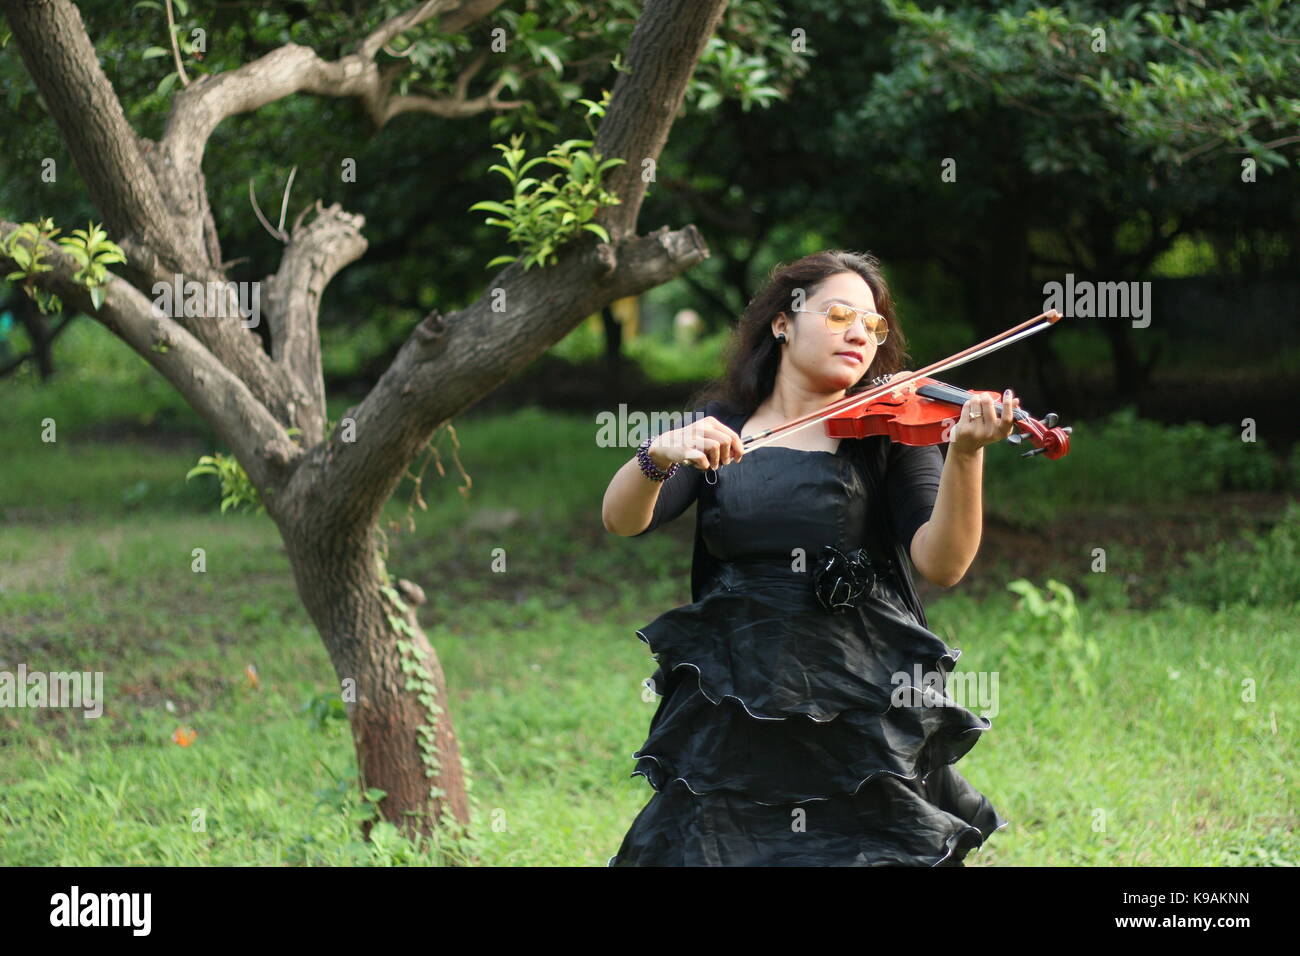 A beautiful Indian girl musician in black dress playing a red violin in front of a tree and nature Stock Photo